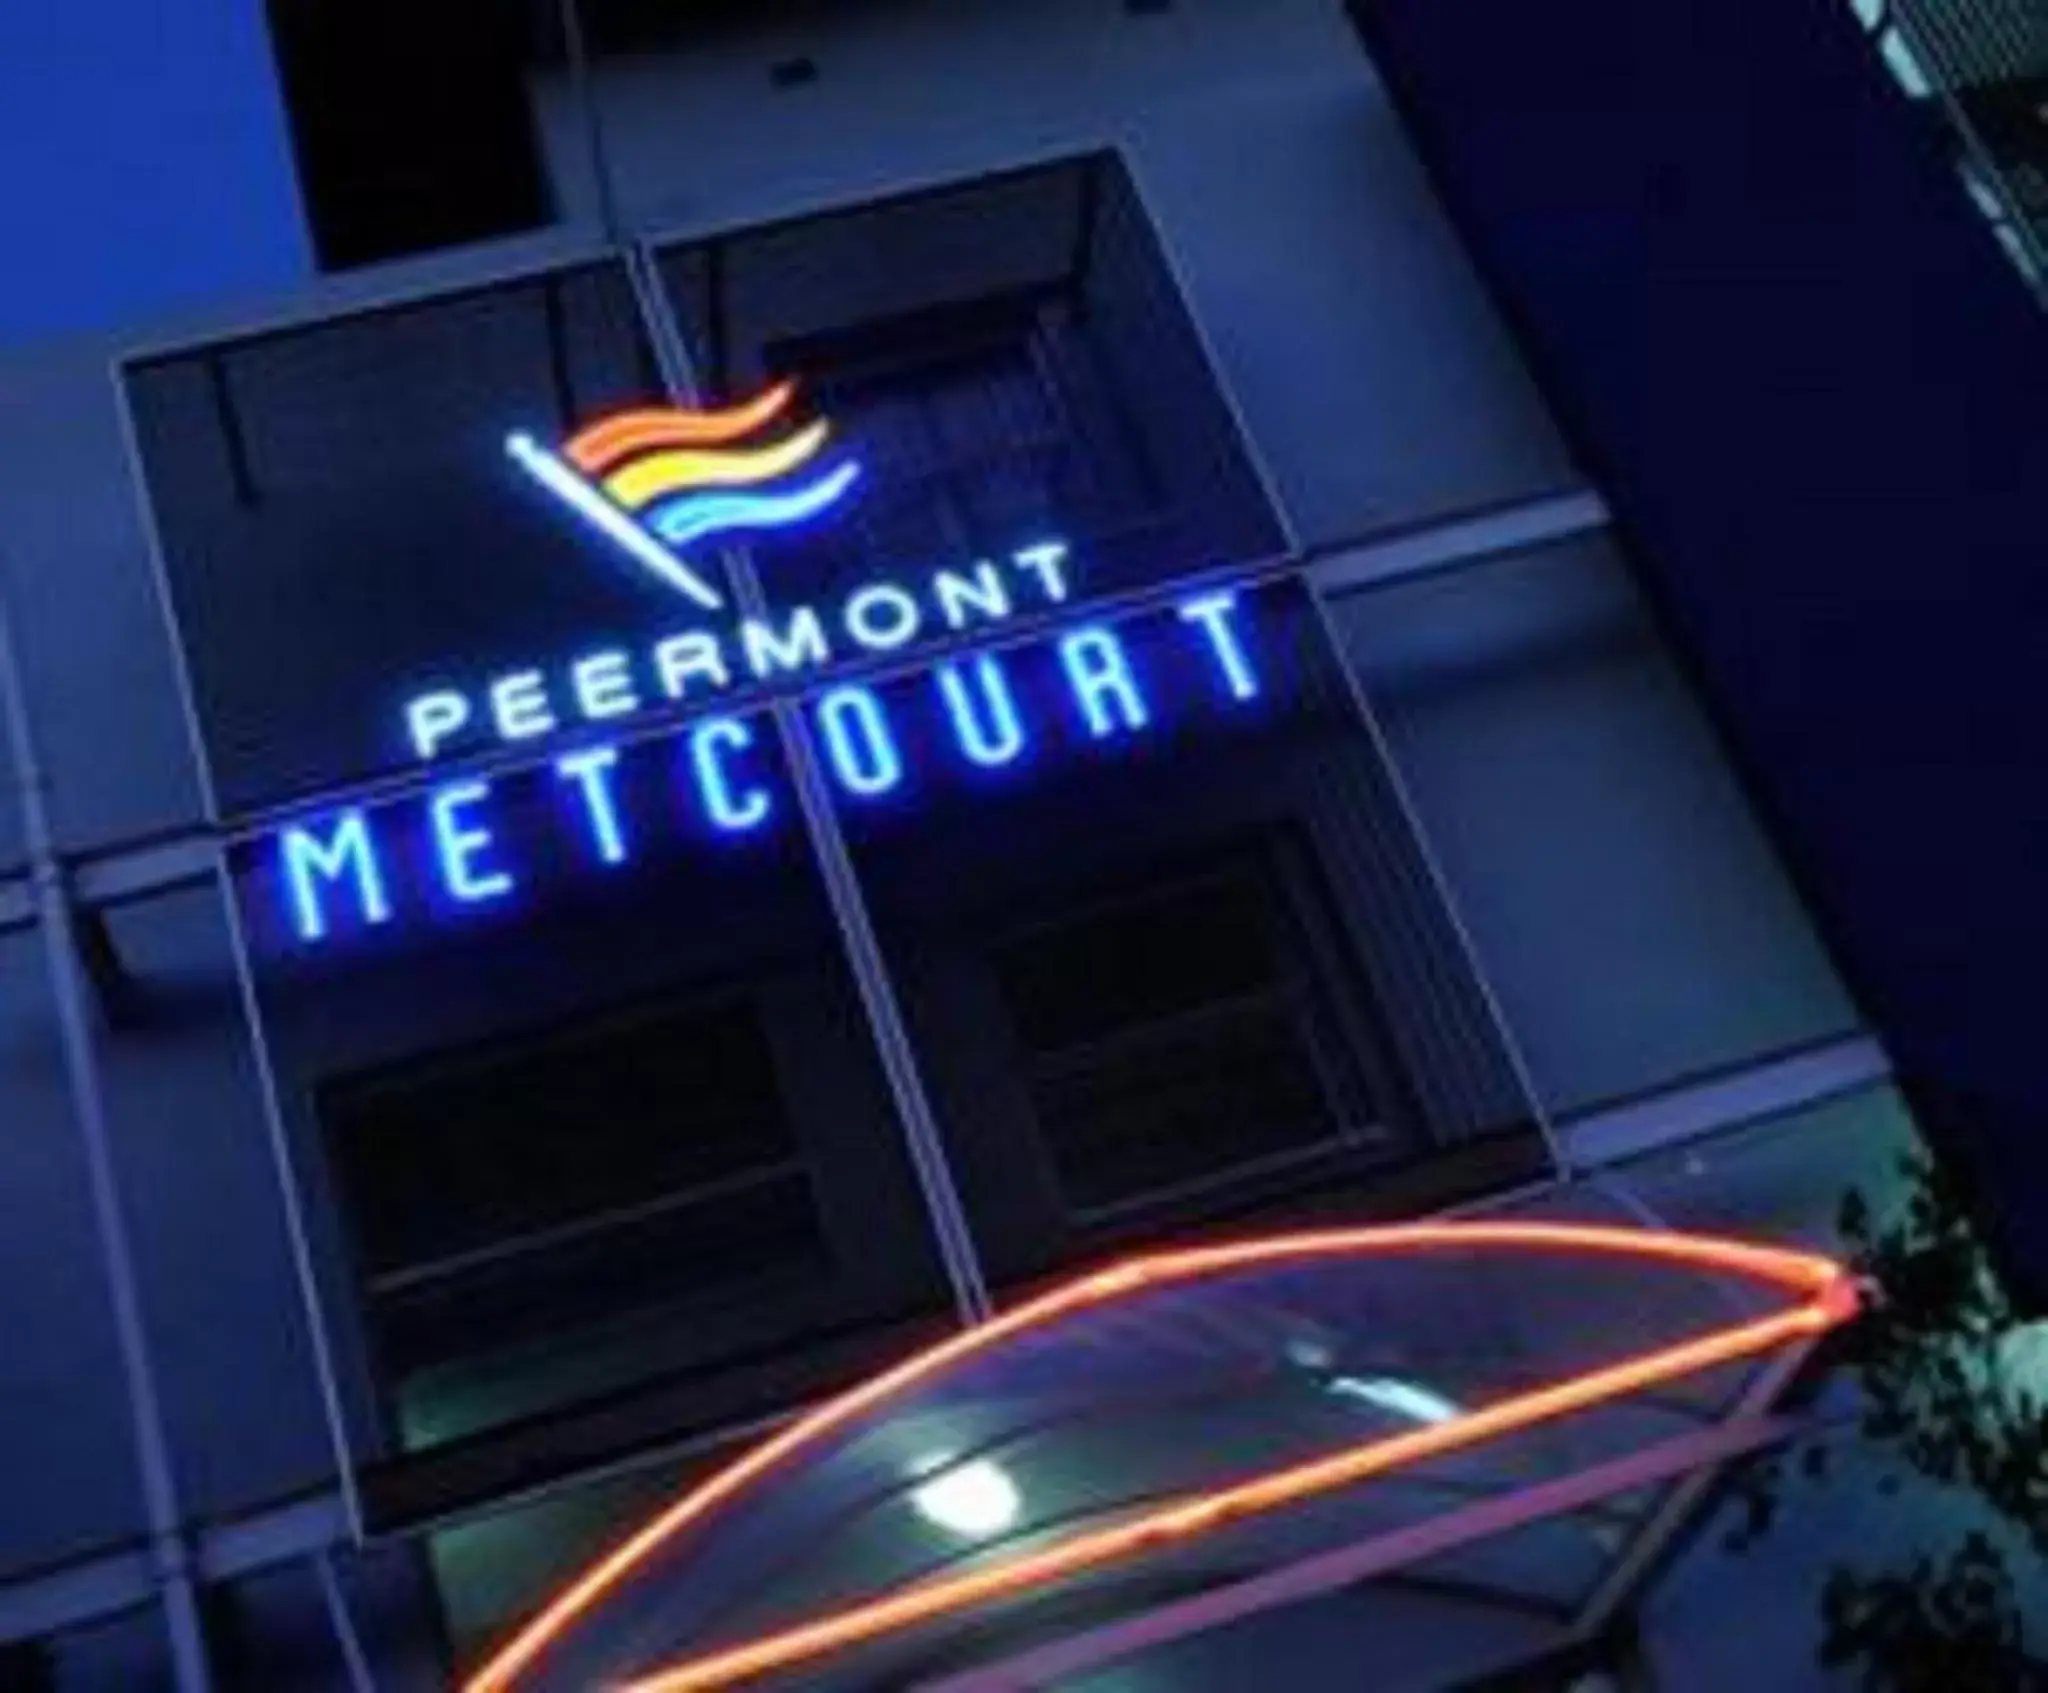 Property logo or sign, Property Building in Peermont Metcourt Hotel